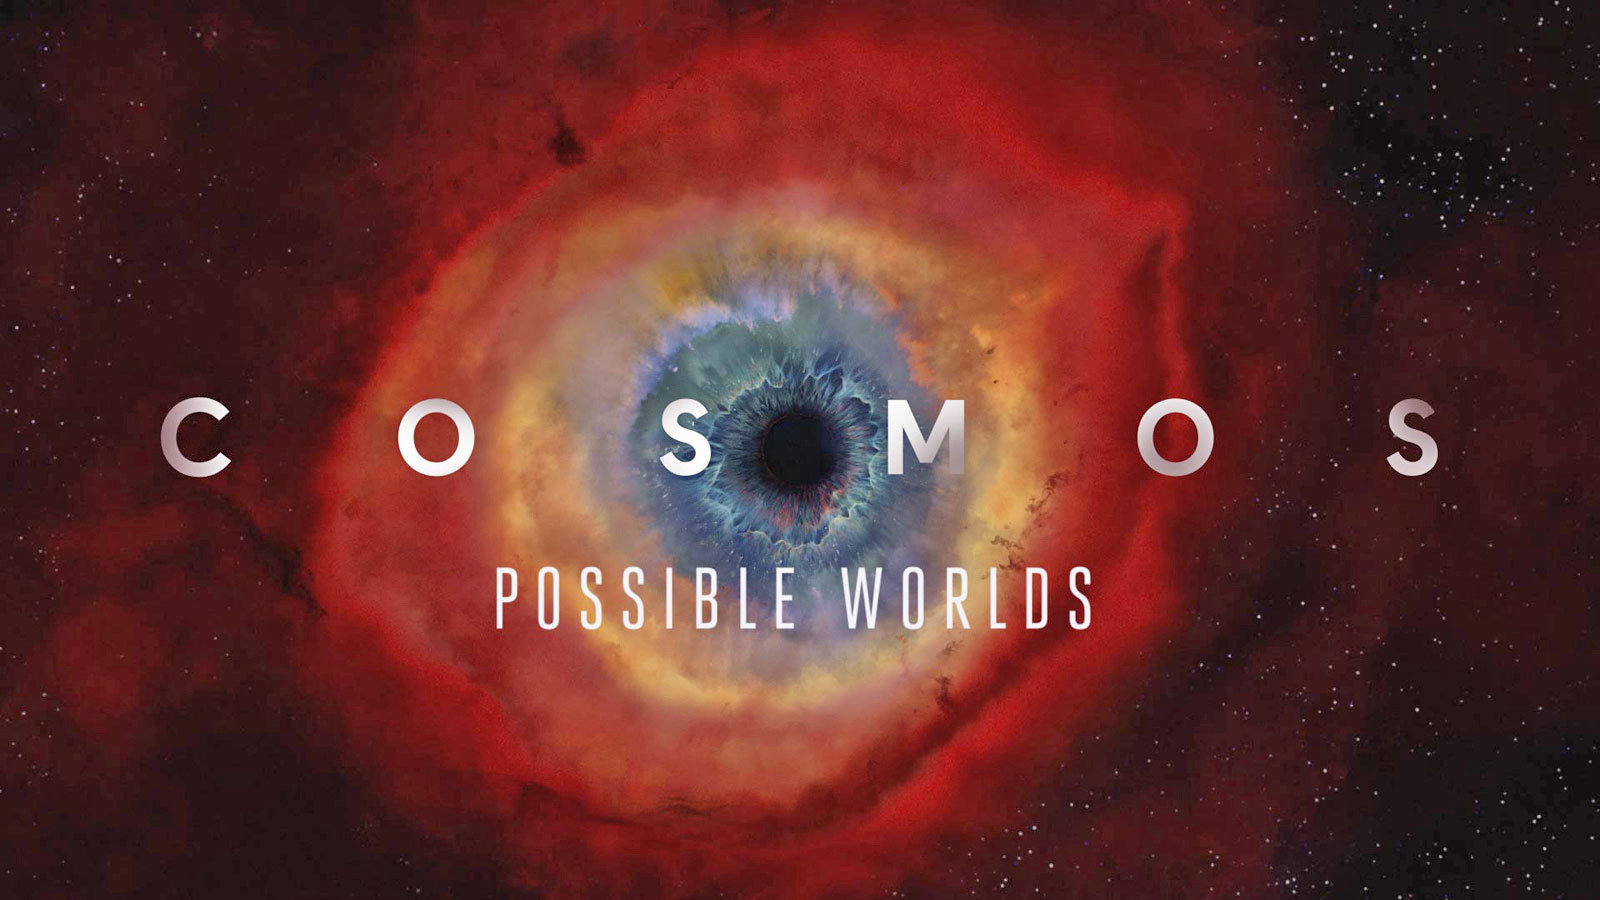 The title screen for Cosmos: Possible Worlds